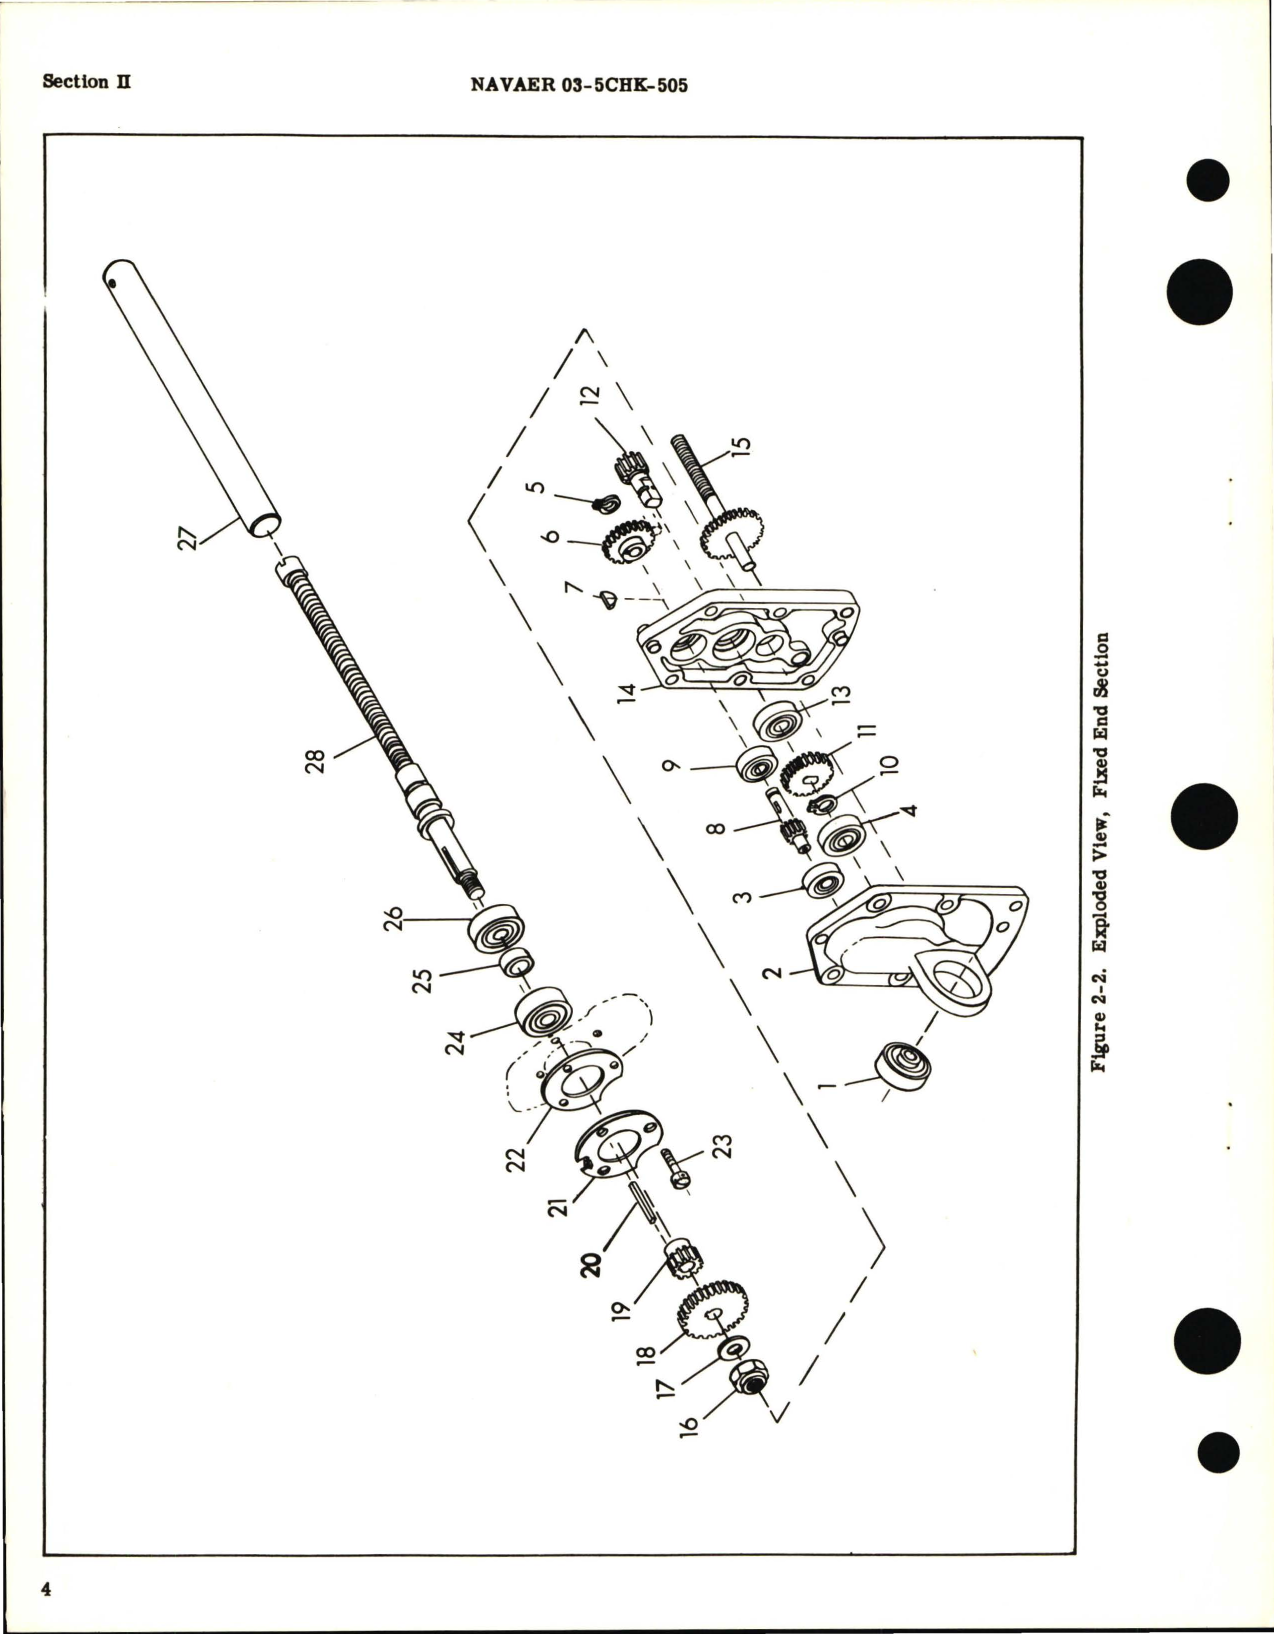 Sample page 8 from AirCorps Library document: Overhaul Instructions for Actuator Assembly Engine Air Throttle, Part No. AL-1192-2, Type 301-1-B